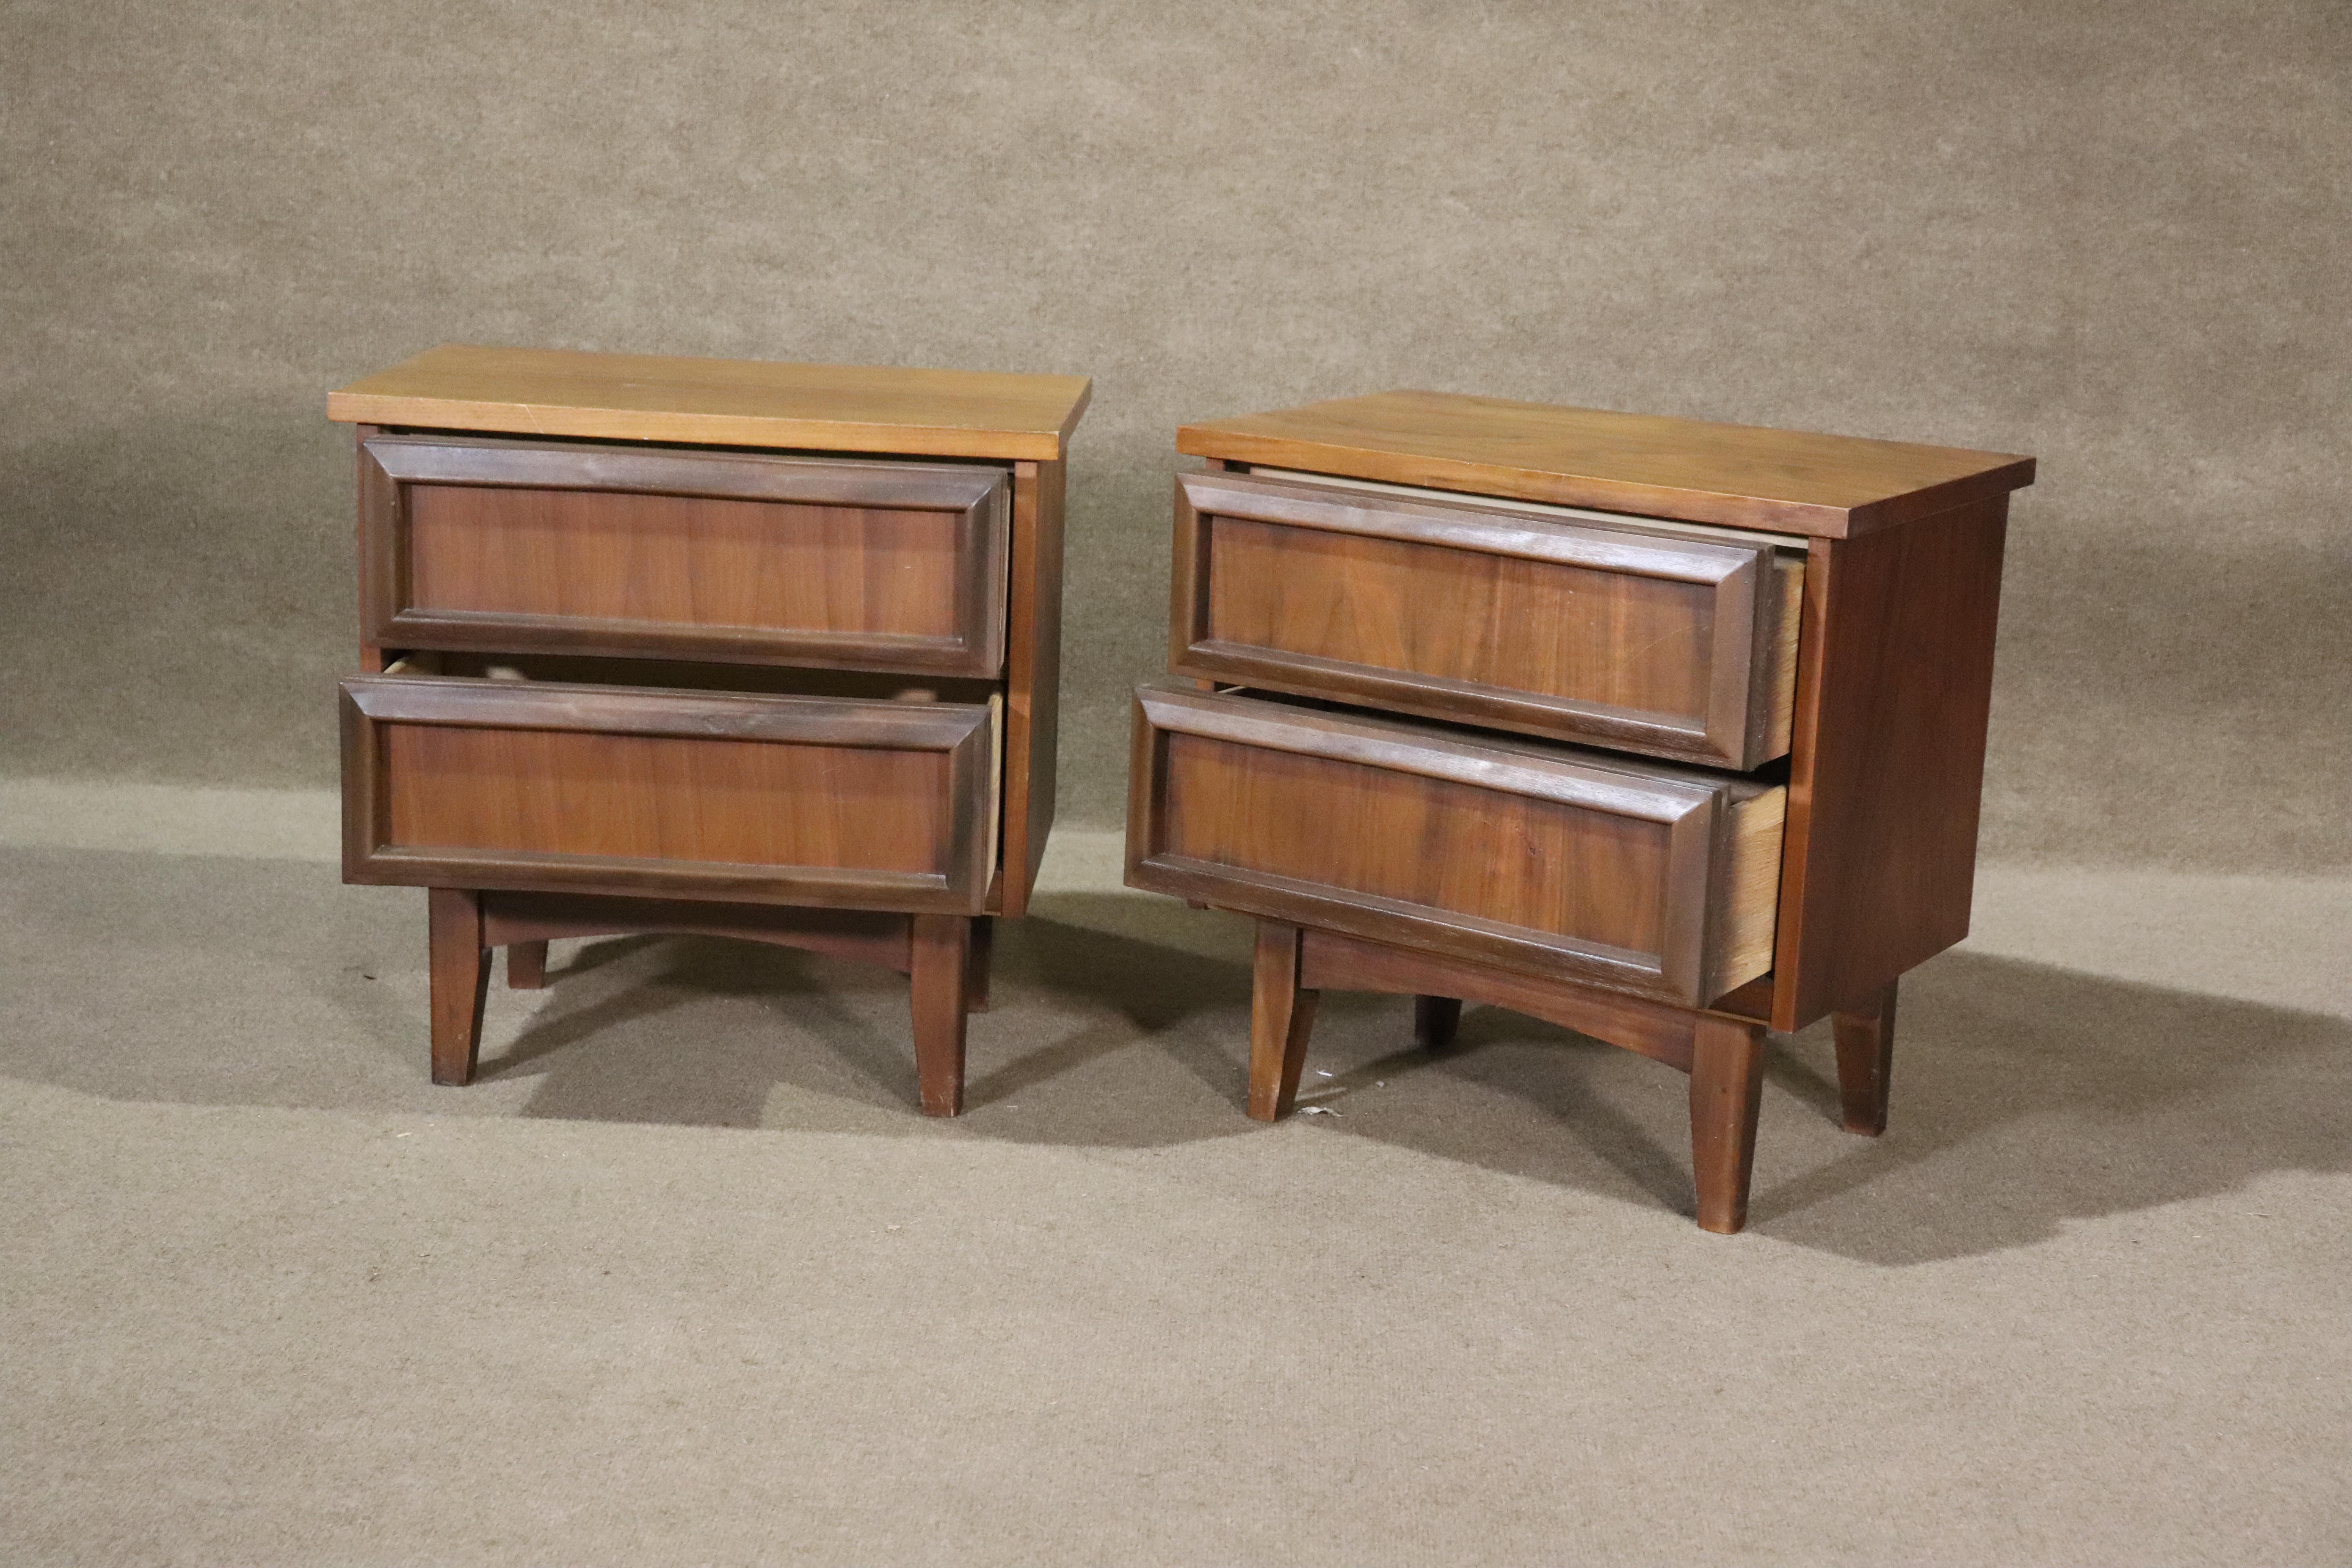 Pair of American made walnut grain side tables with two drawers for storage. Great for living room or bedside use.
Please confirm location NY or NJ